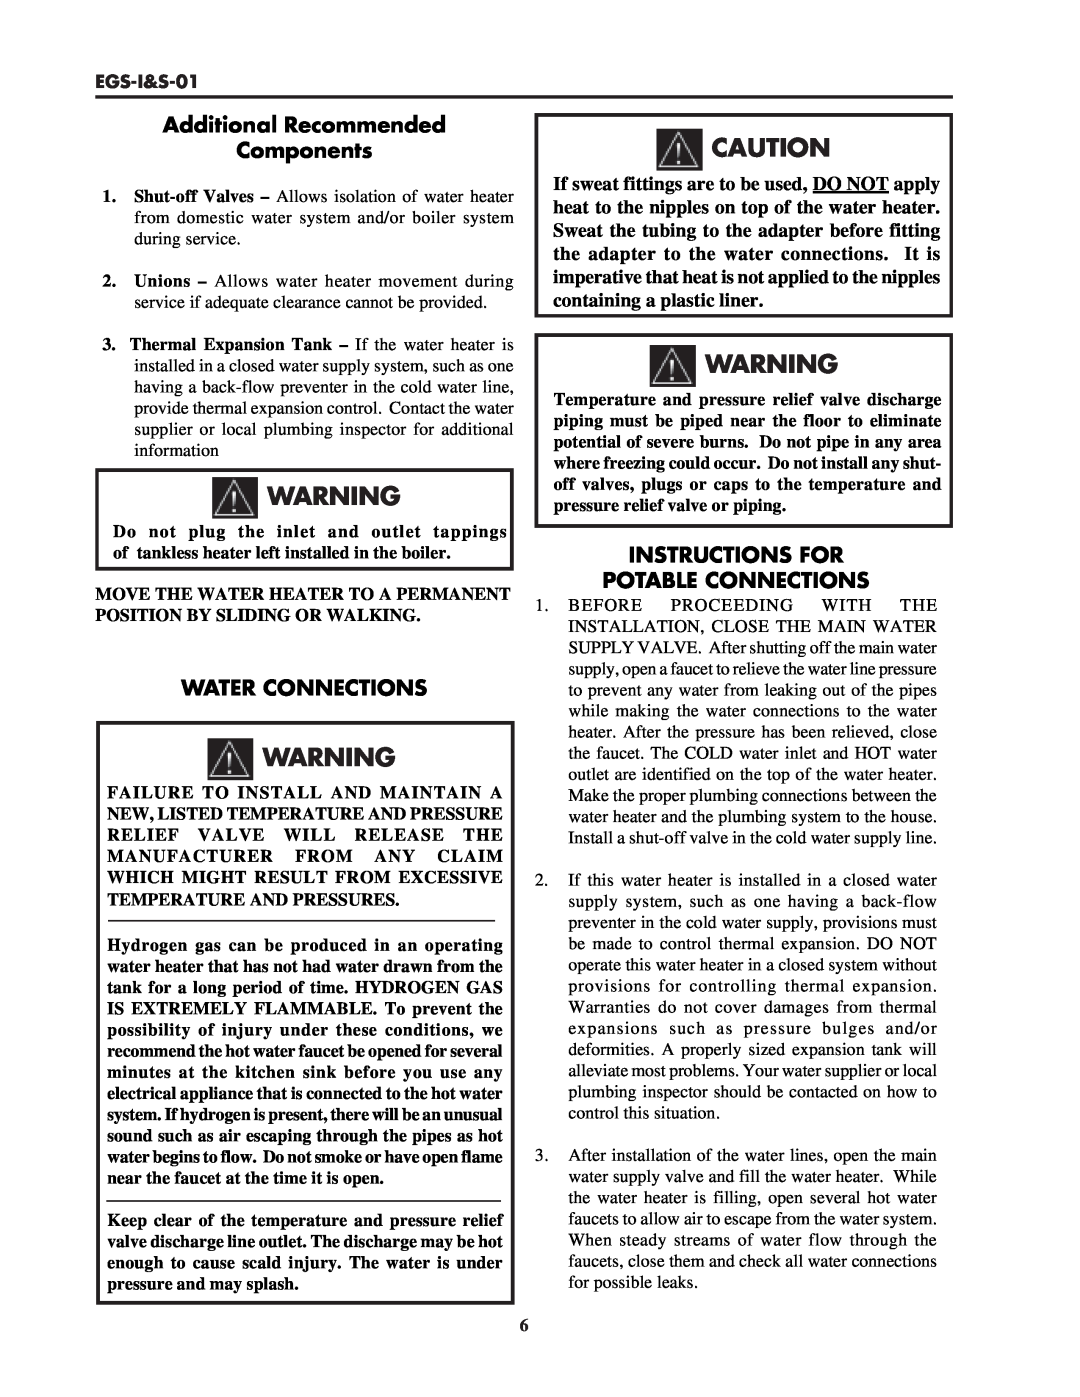 Lochinvar EGS-I&S-01 Additional Recommended Components, Water Connections, Instructions For Potable Connections 